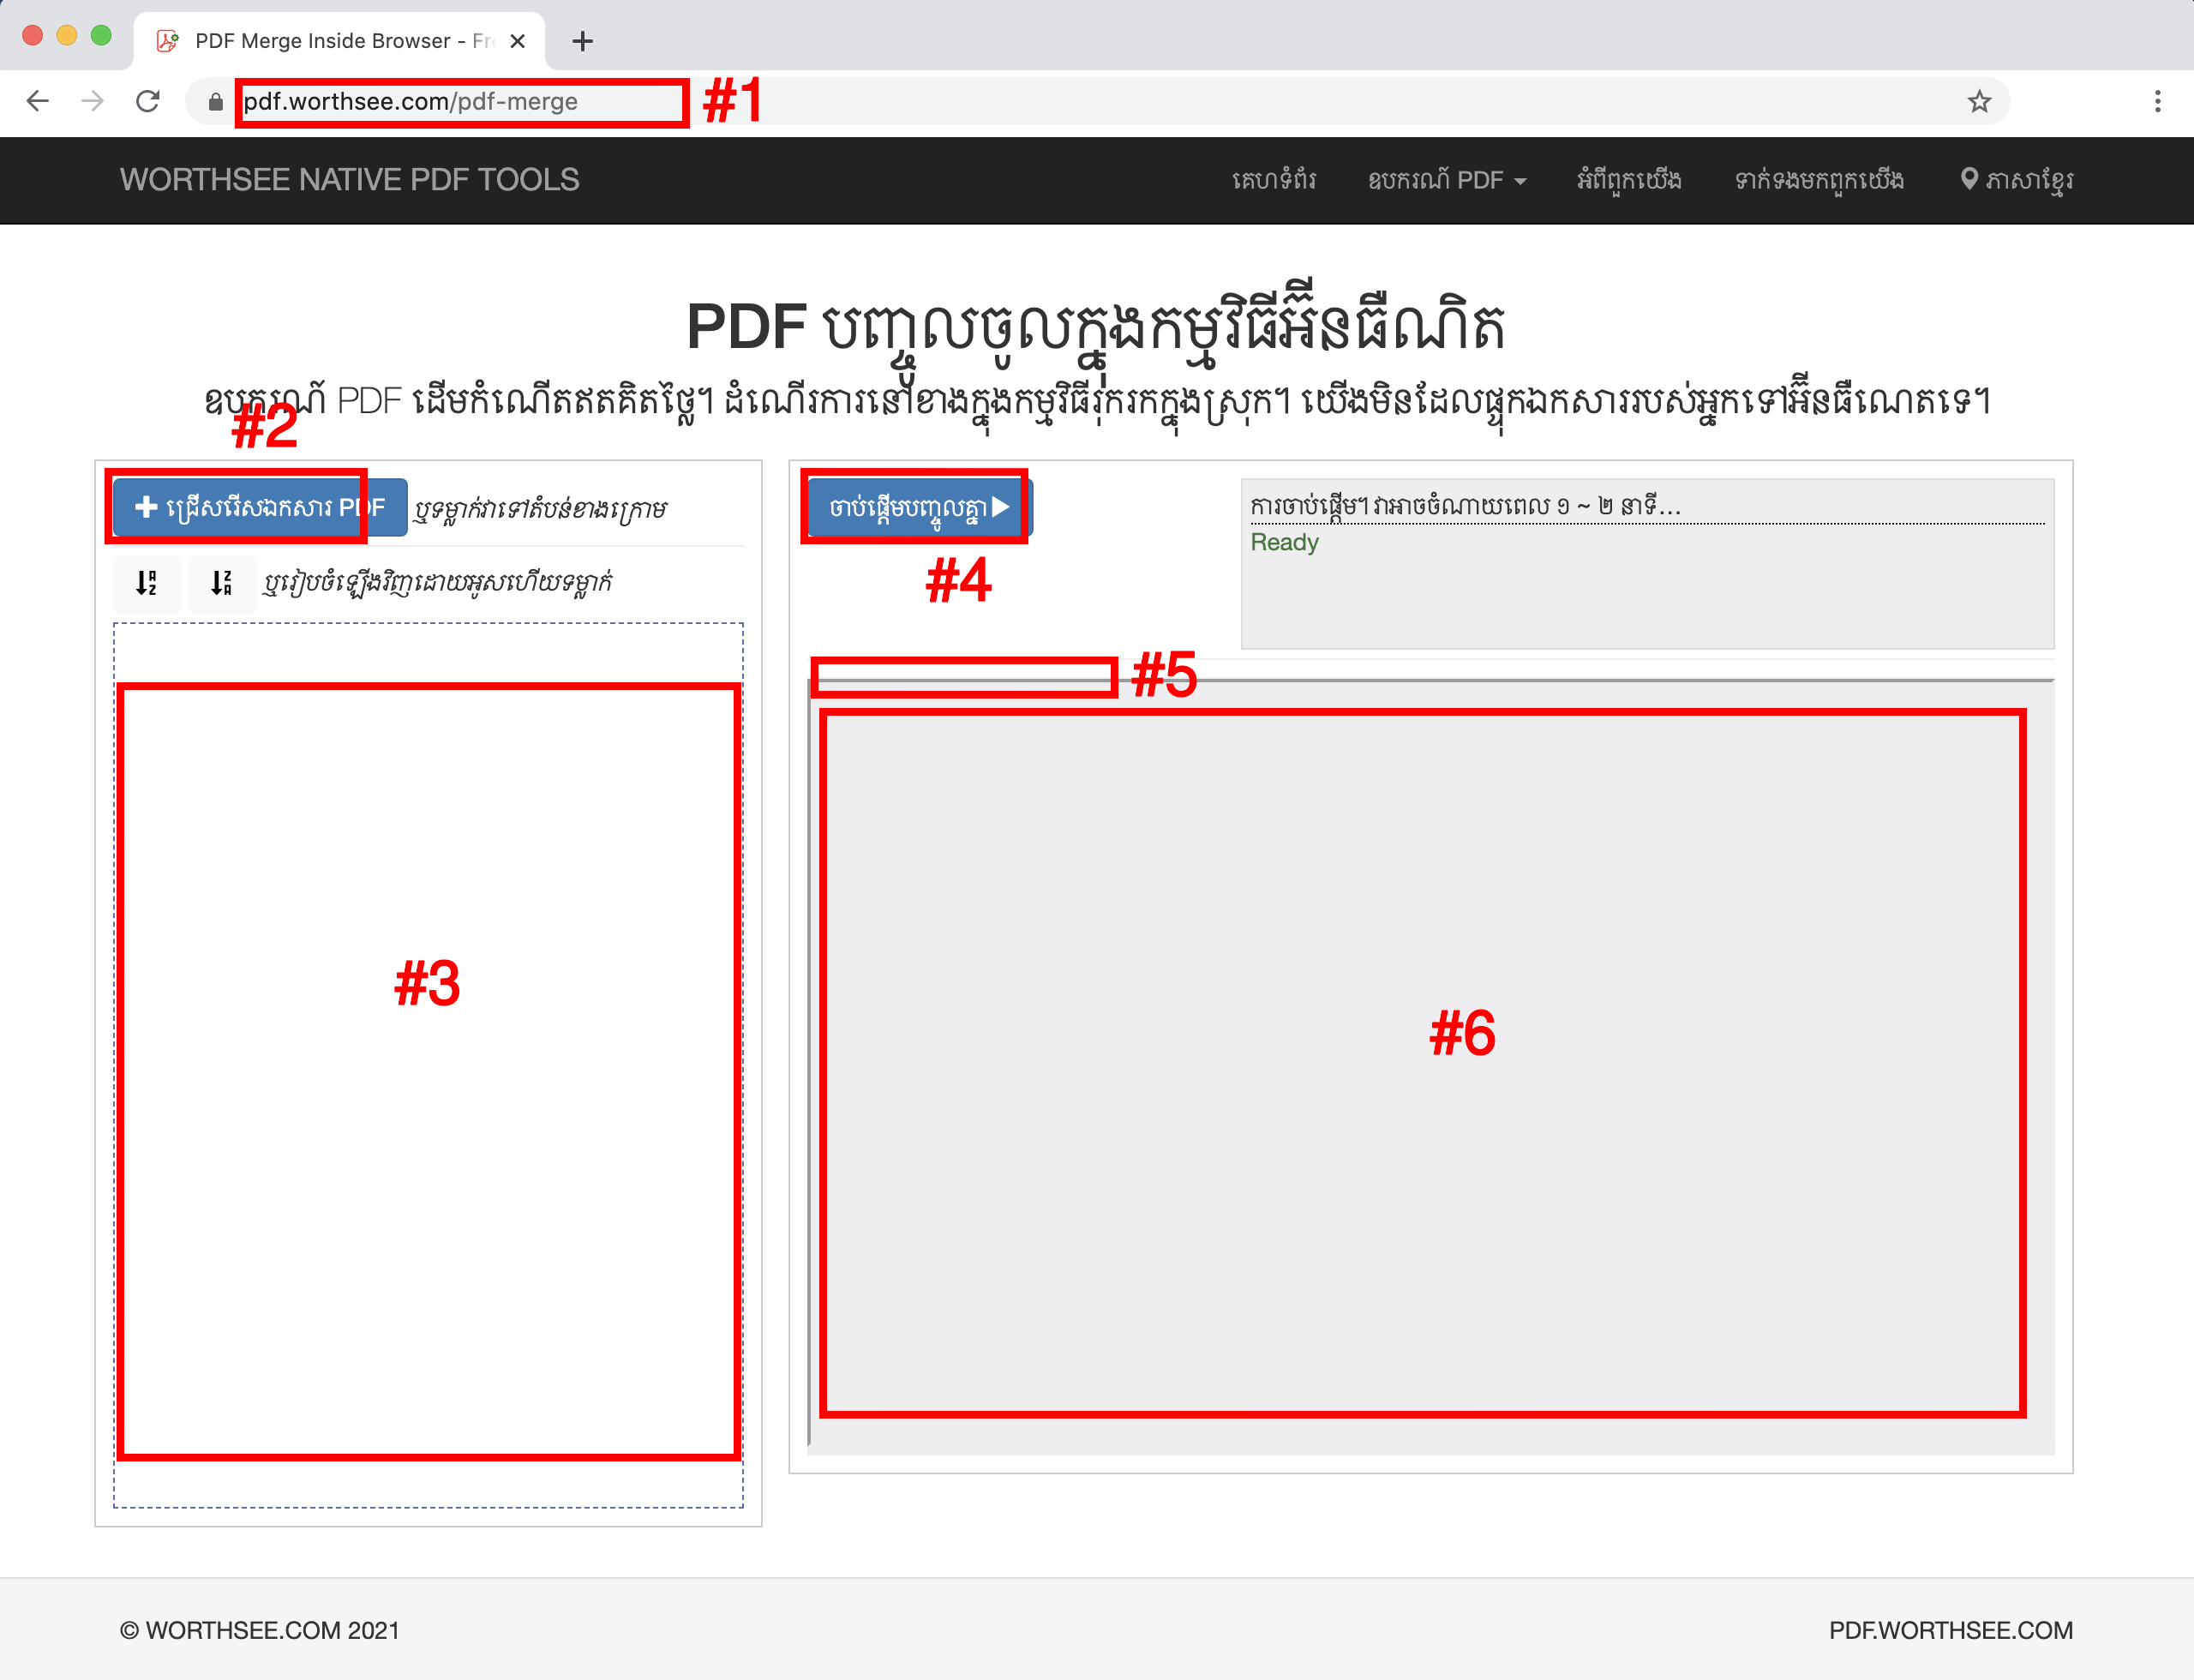 Tutorial image for pdf merge web page